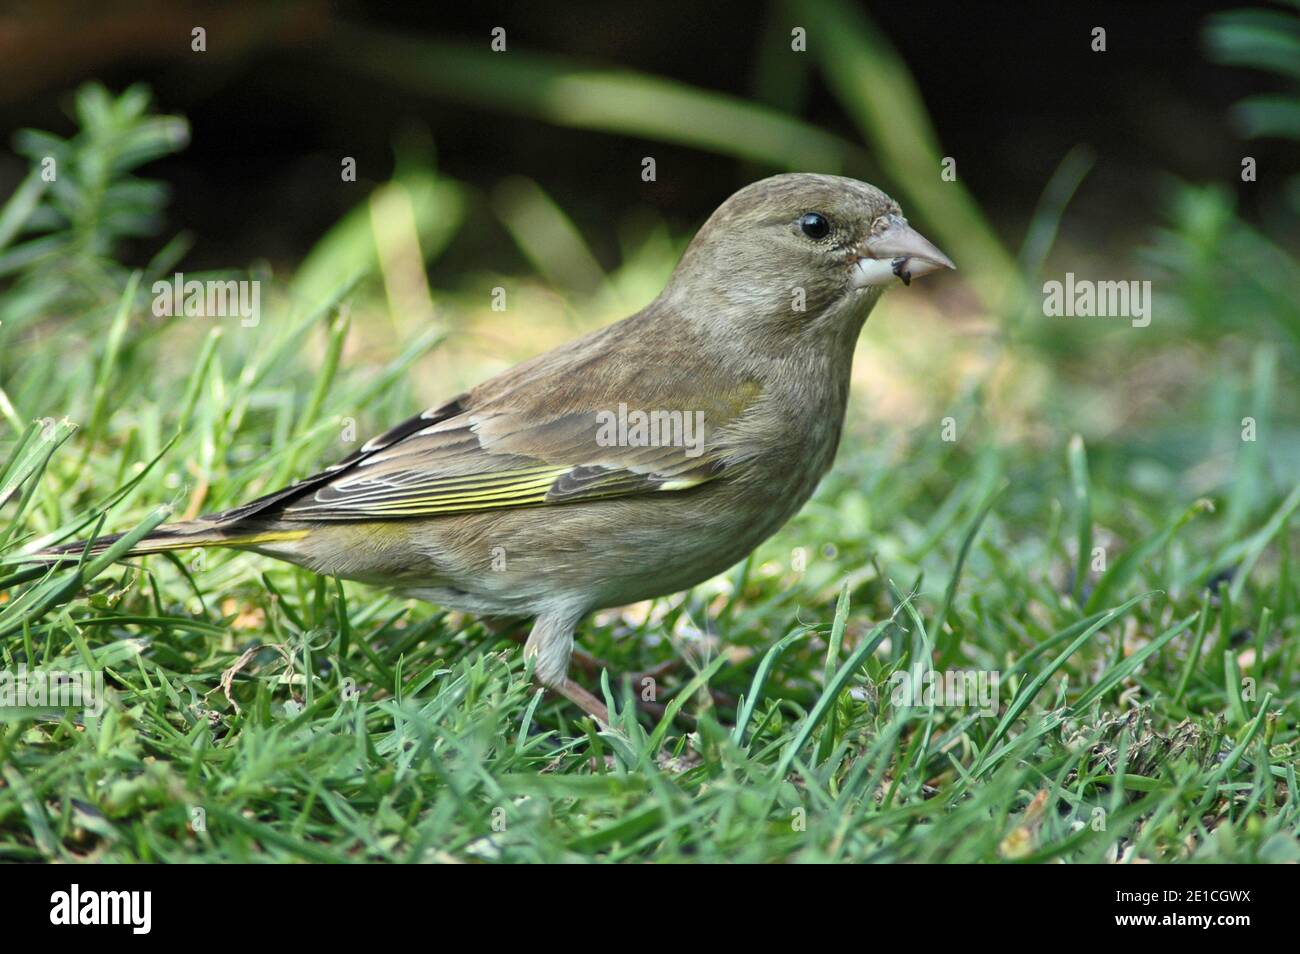 Female Greenfinch (Carduelis chloris) standing in grass, West Sussex Coastal Plain, Chichester Plain,  England, UK. Spring. 5 3/4 inches or 14.5 cms. Stock Photo